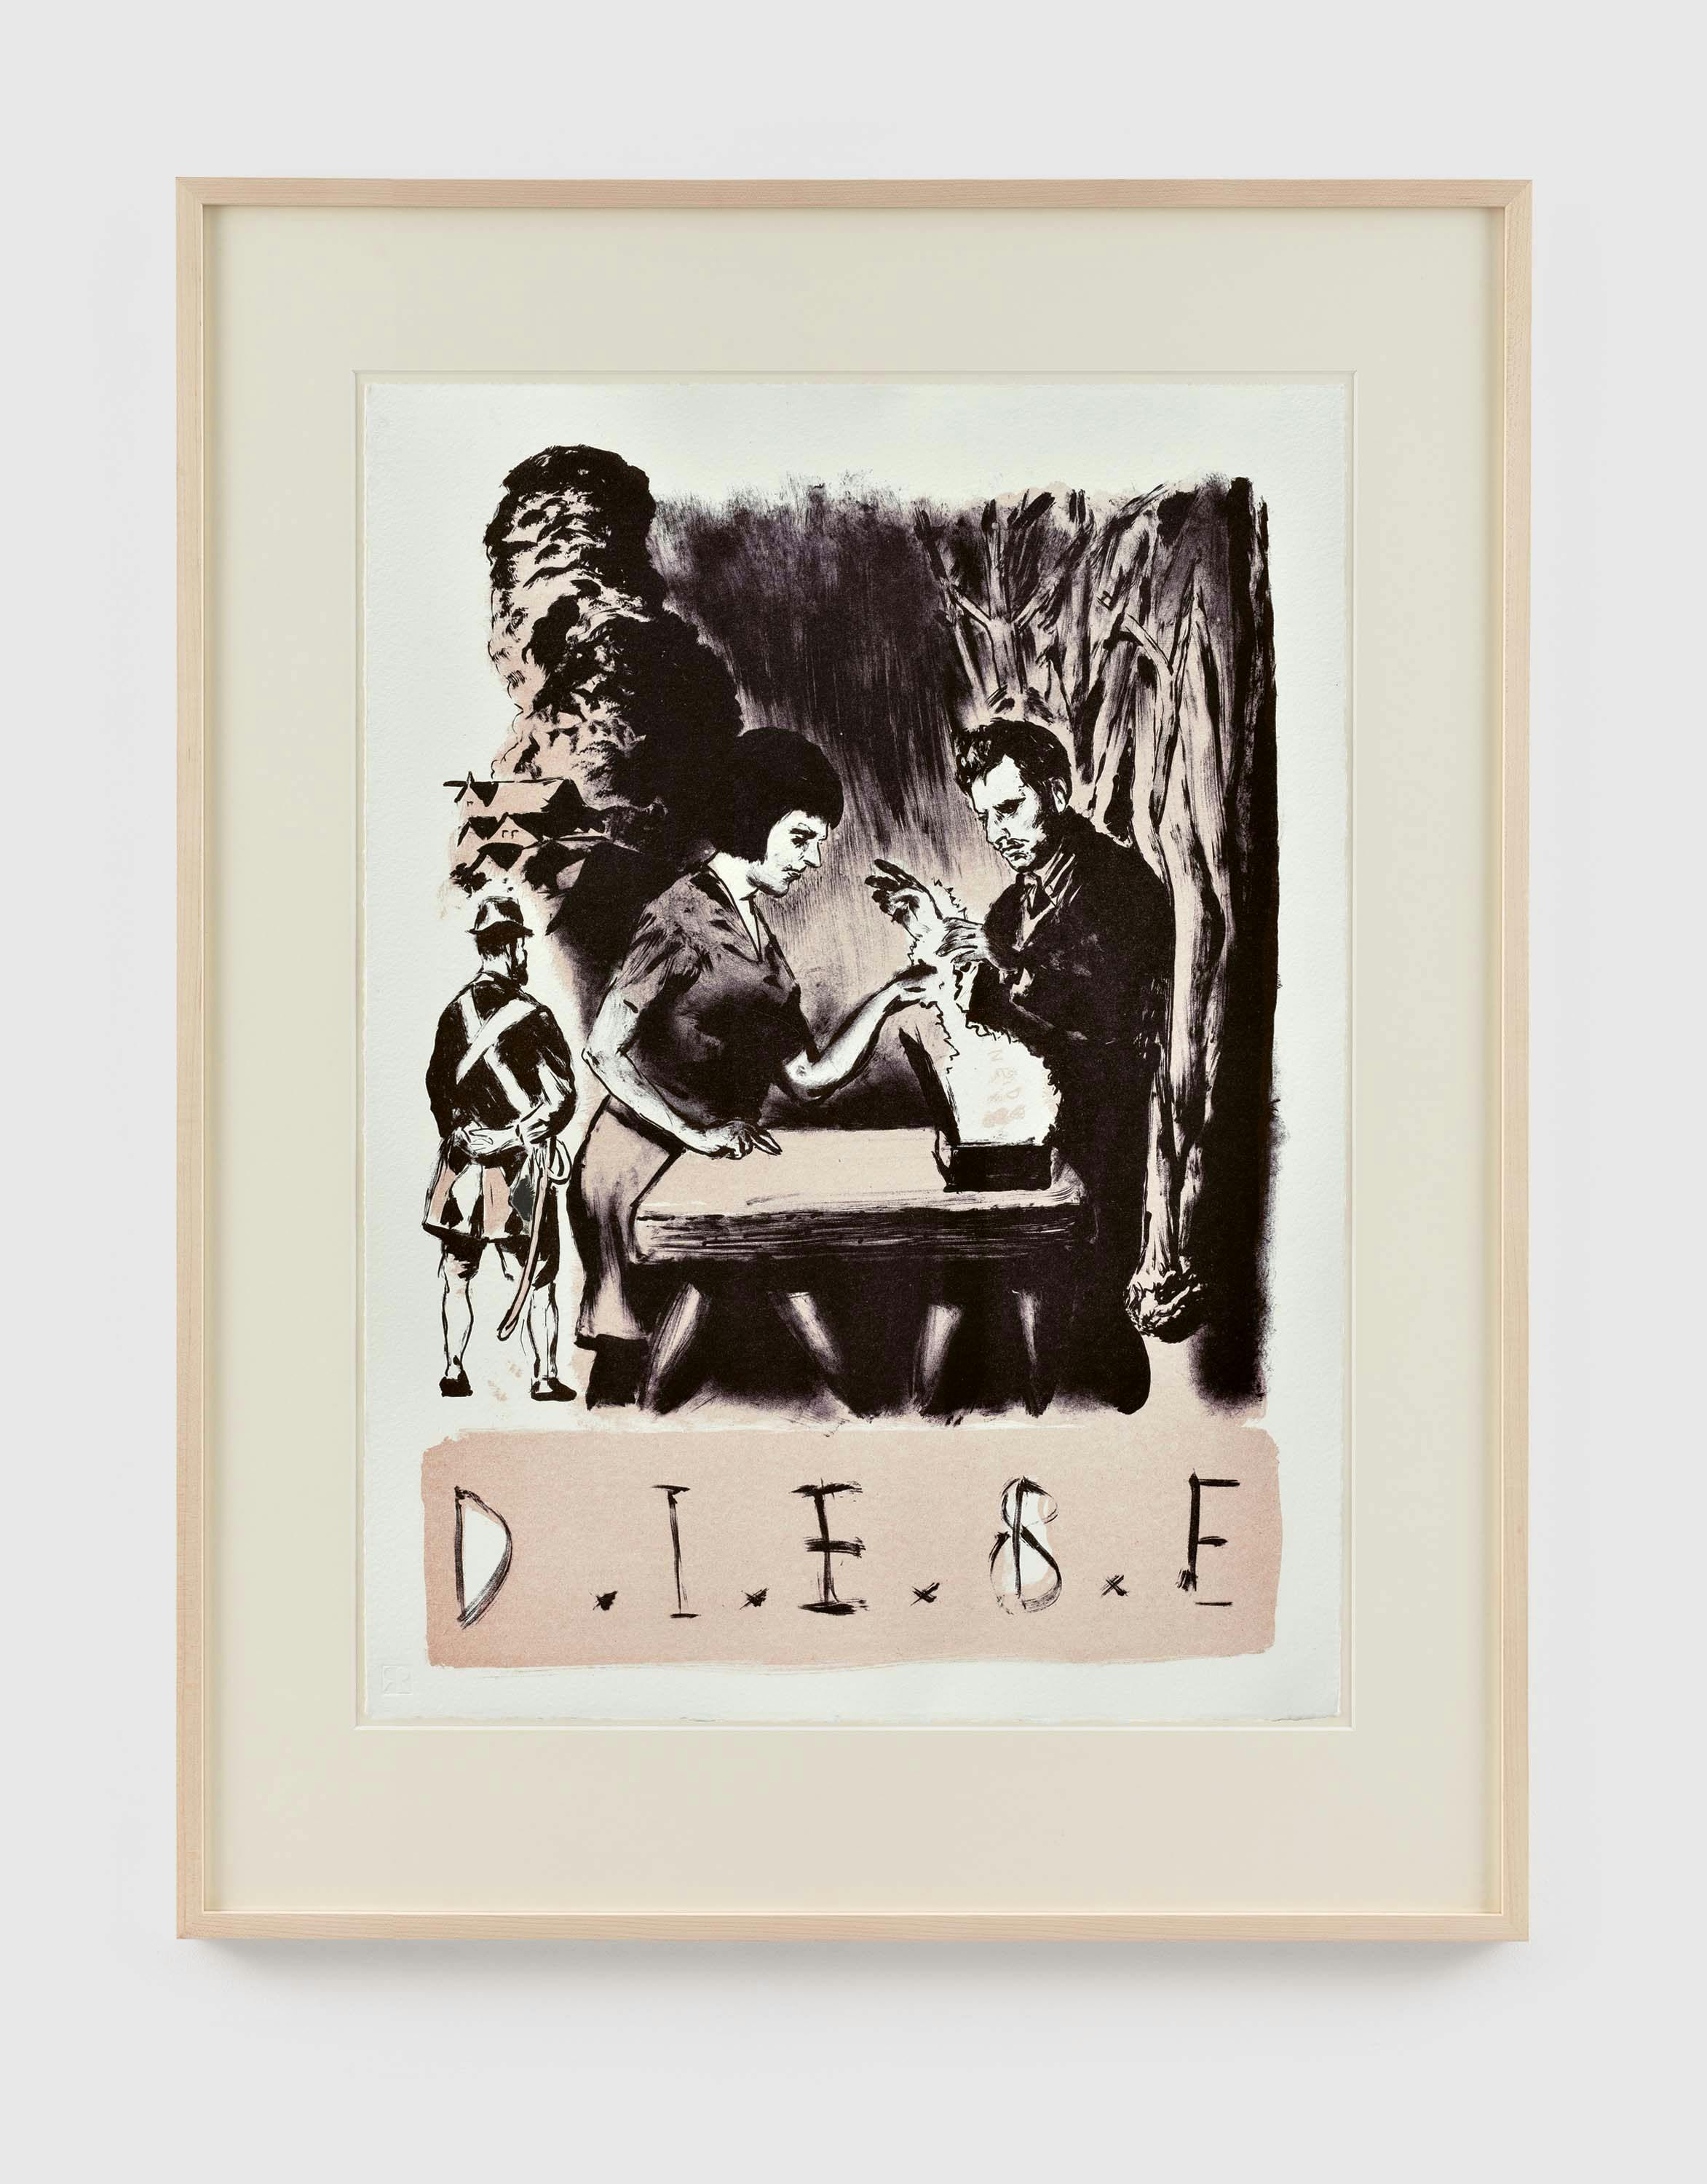 A print by Neo Rauch, titled Diebe, dated 2020. 